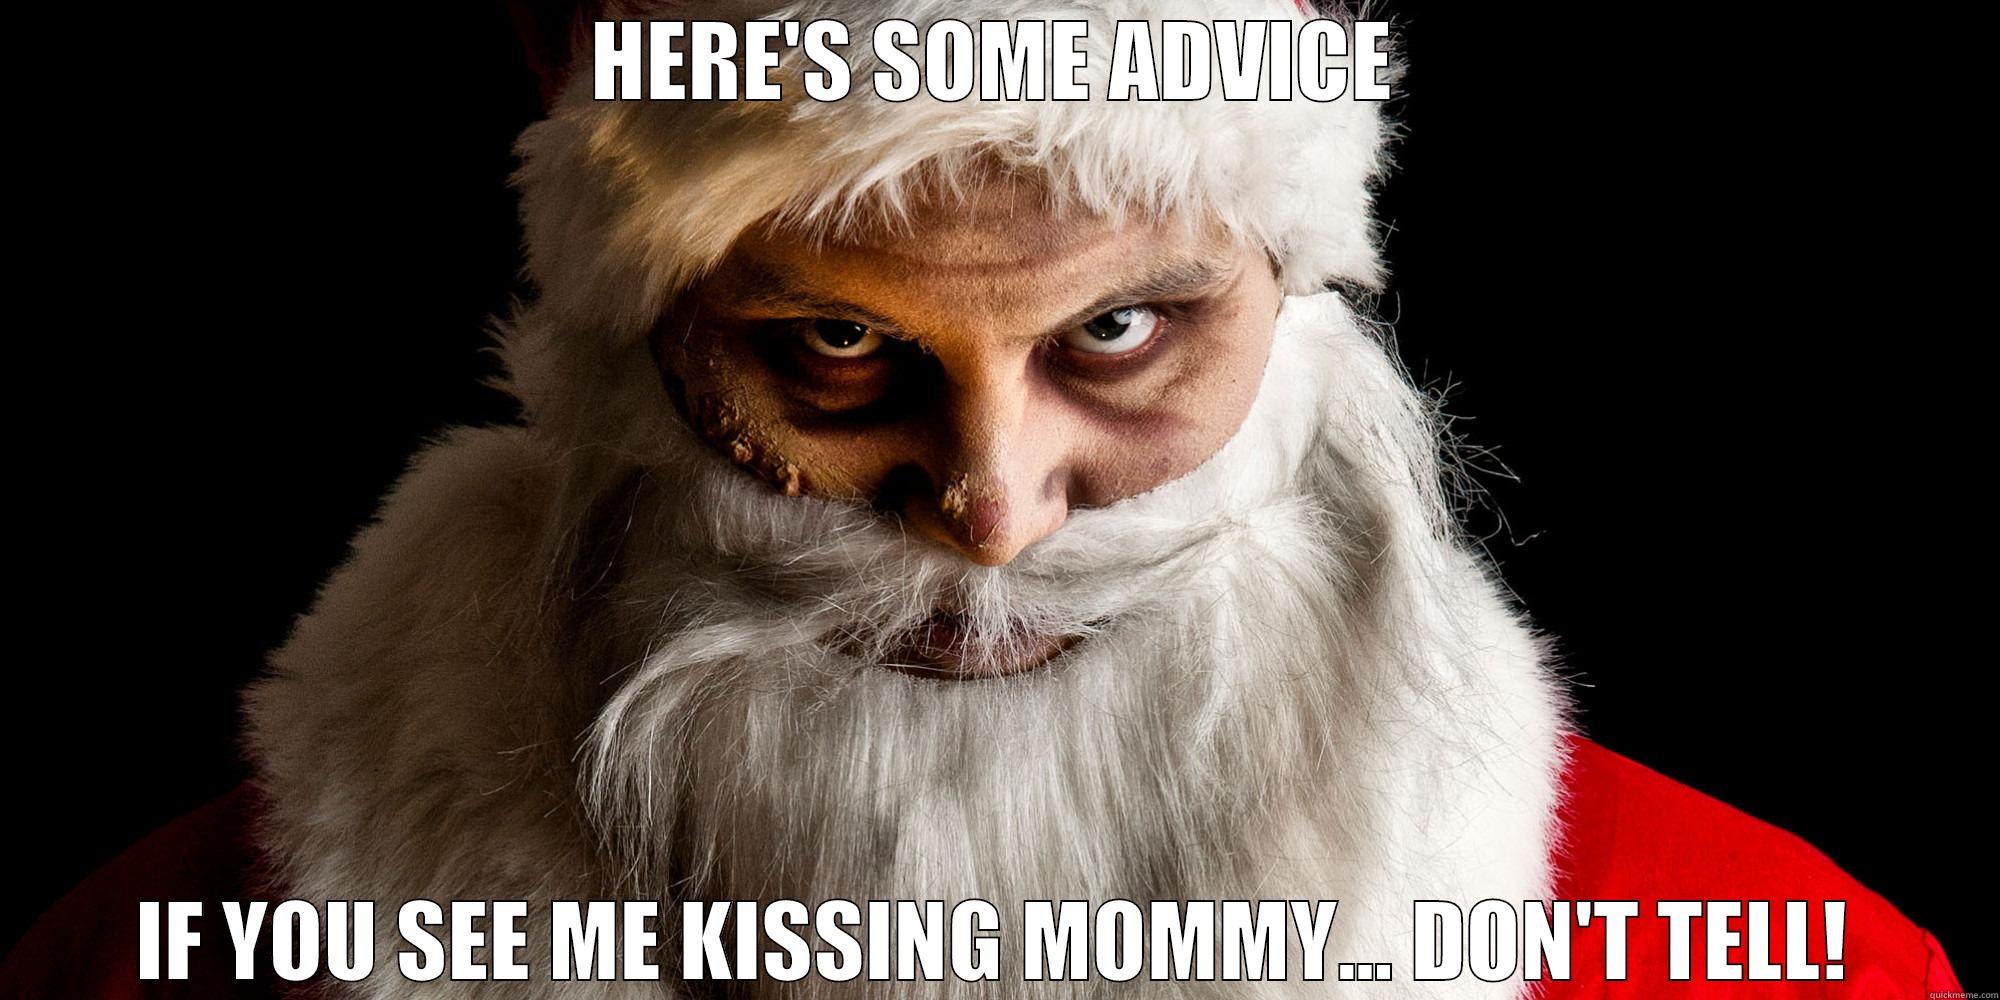 HERE'S SOME ADVICE IF YOU SEE ME KISSING MOMMY... DON'T TELL! Misc